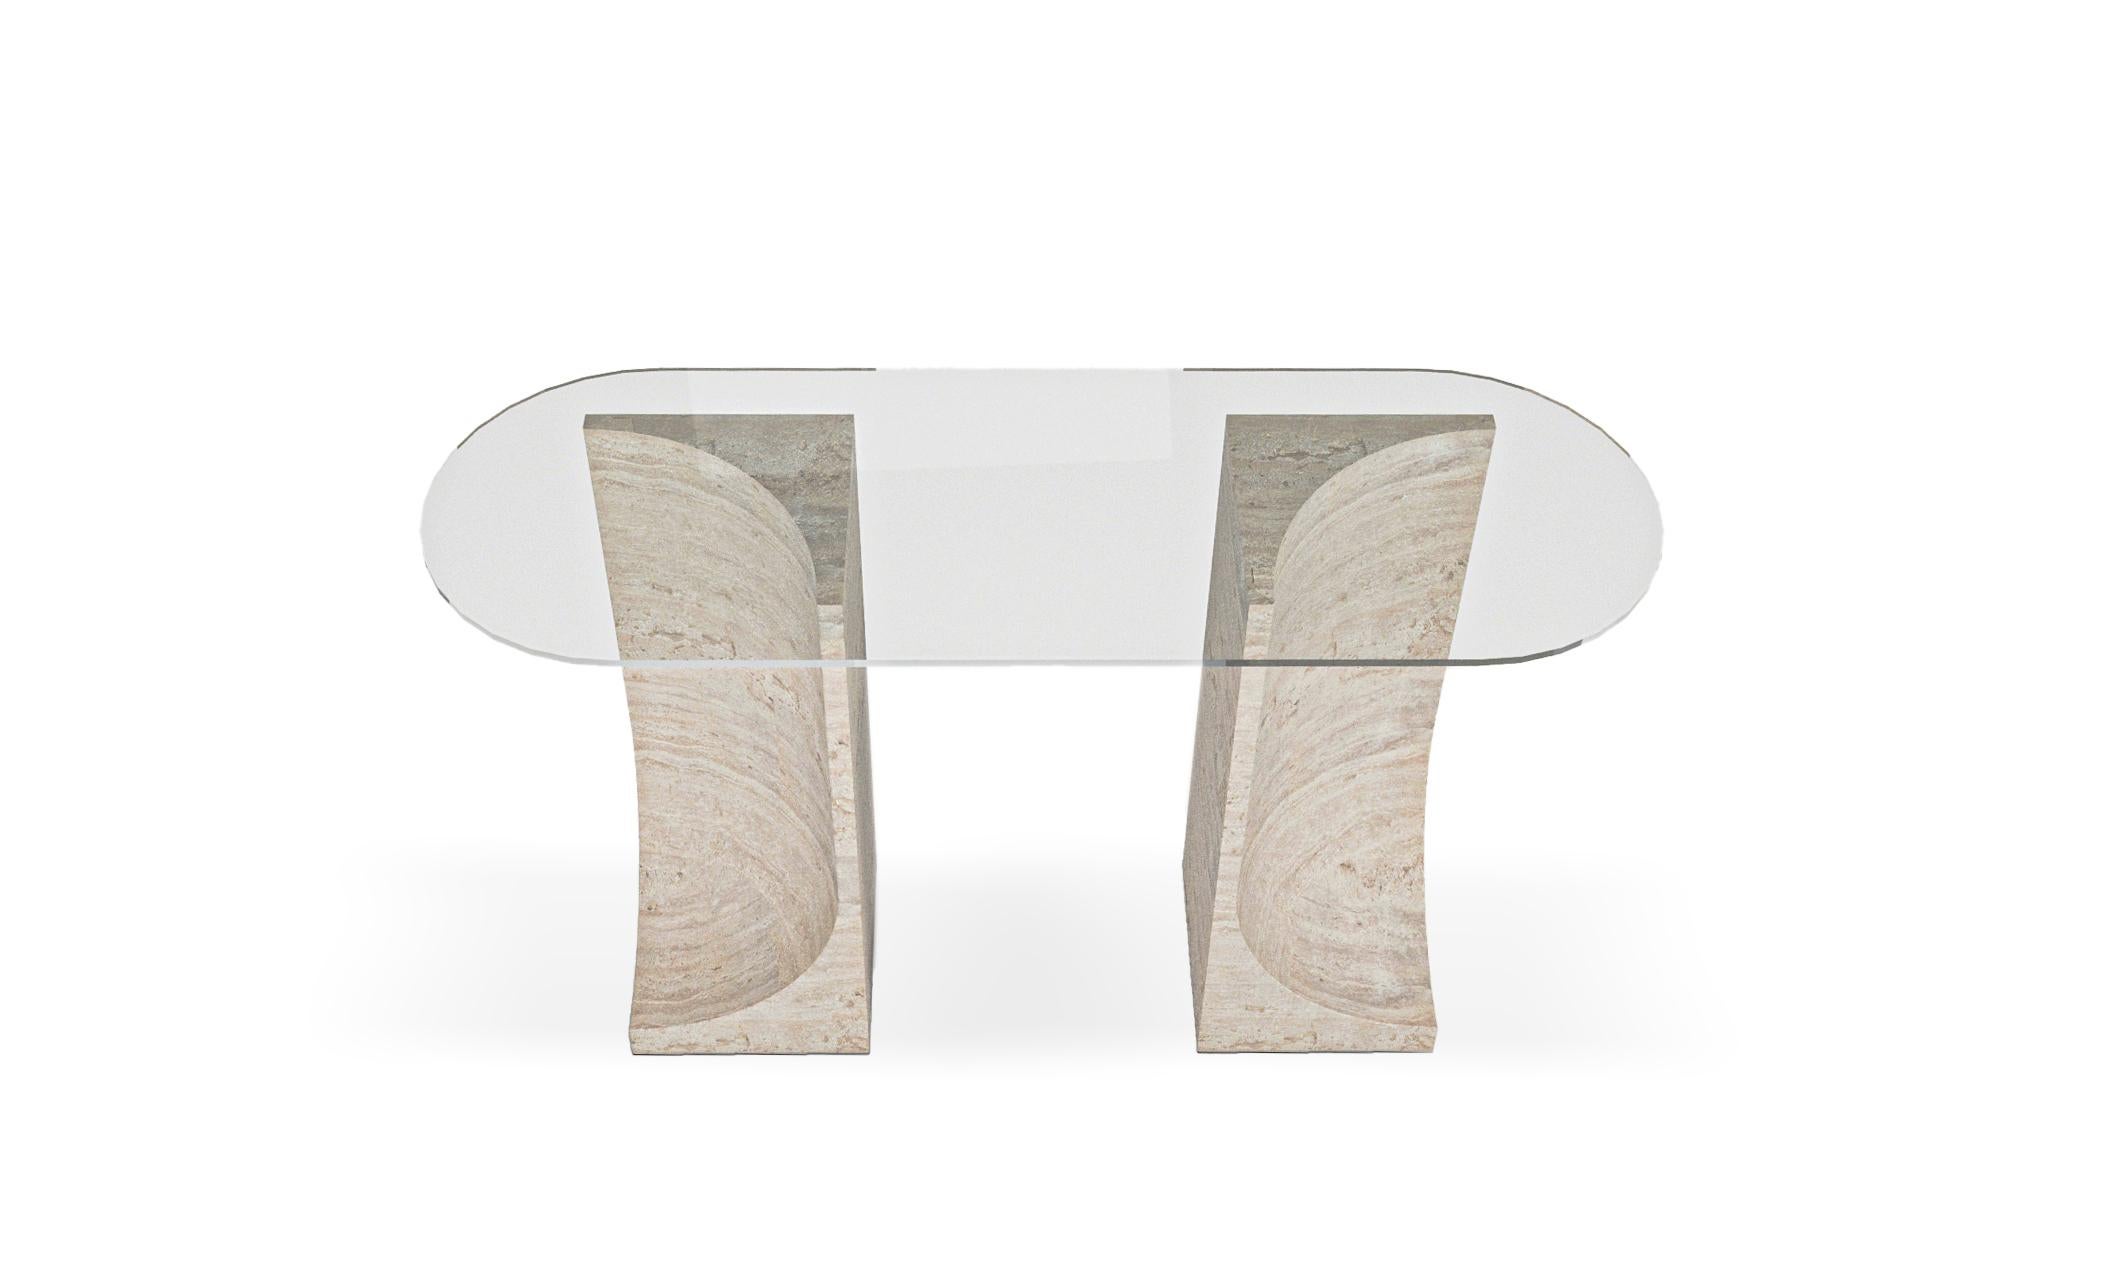 Contemporary Modern Edge Console Console Table in Travertino Marble by Ferriani Bolgi for Collector Studio

Family of coffee tables, console and dining tables characterized by an architectural and sculptural base, combined with a glass